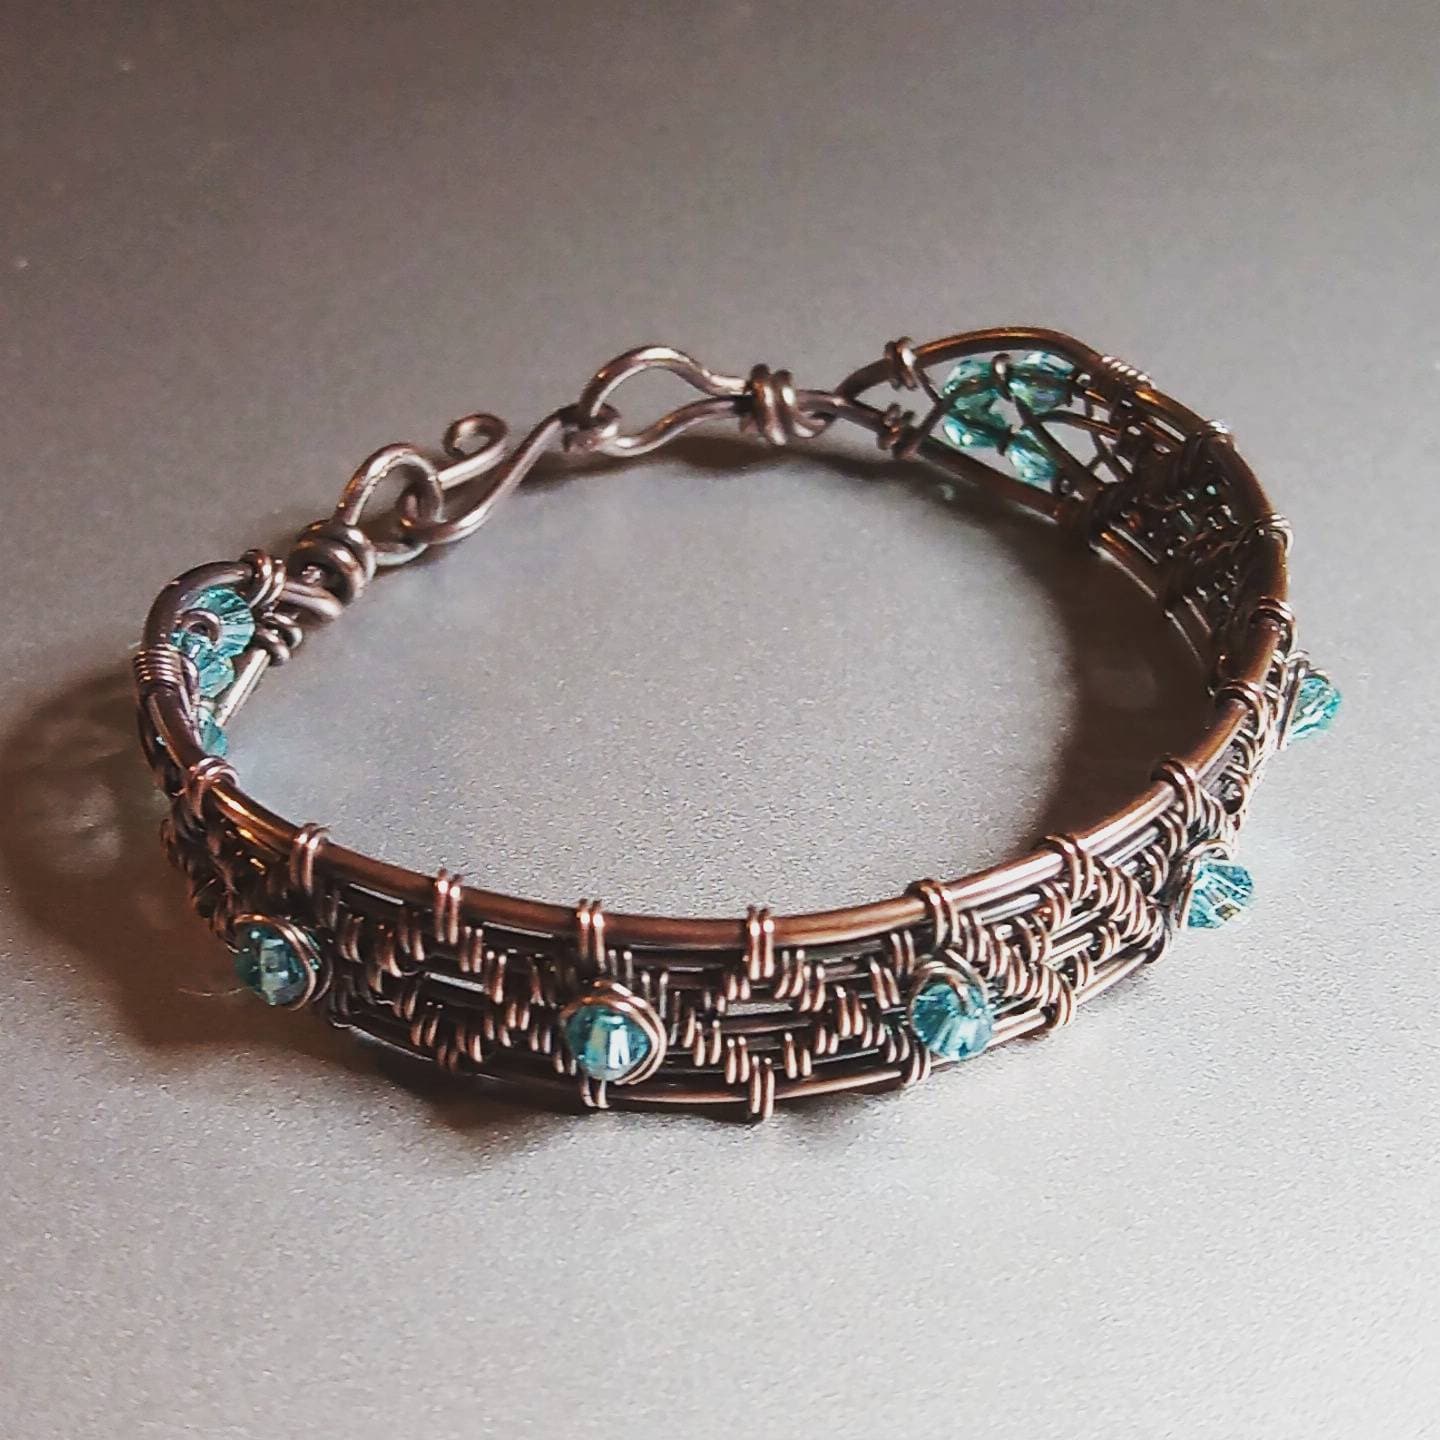 Woven copper bracelet with blue bicone beads | Etsy